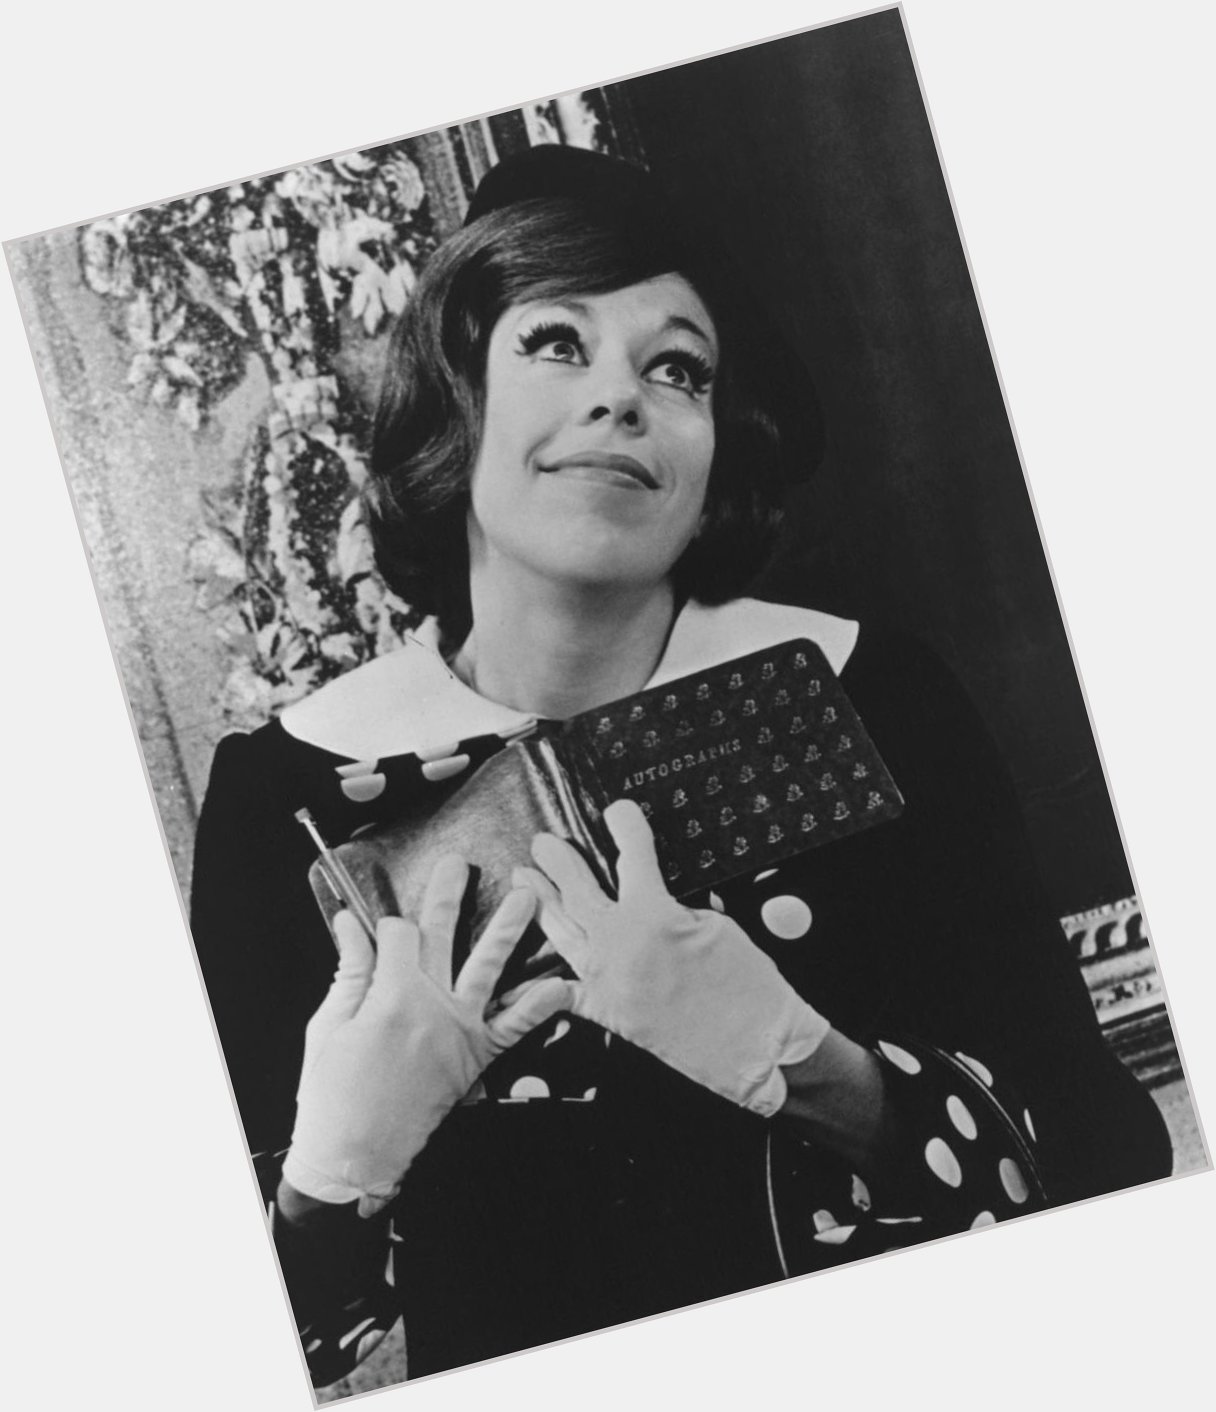 Happy birthday to the incredible Carol Burnett! We re proud that she is a part the Shubert family. 